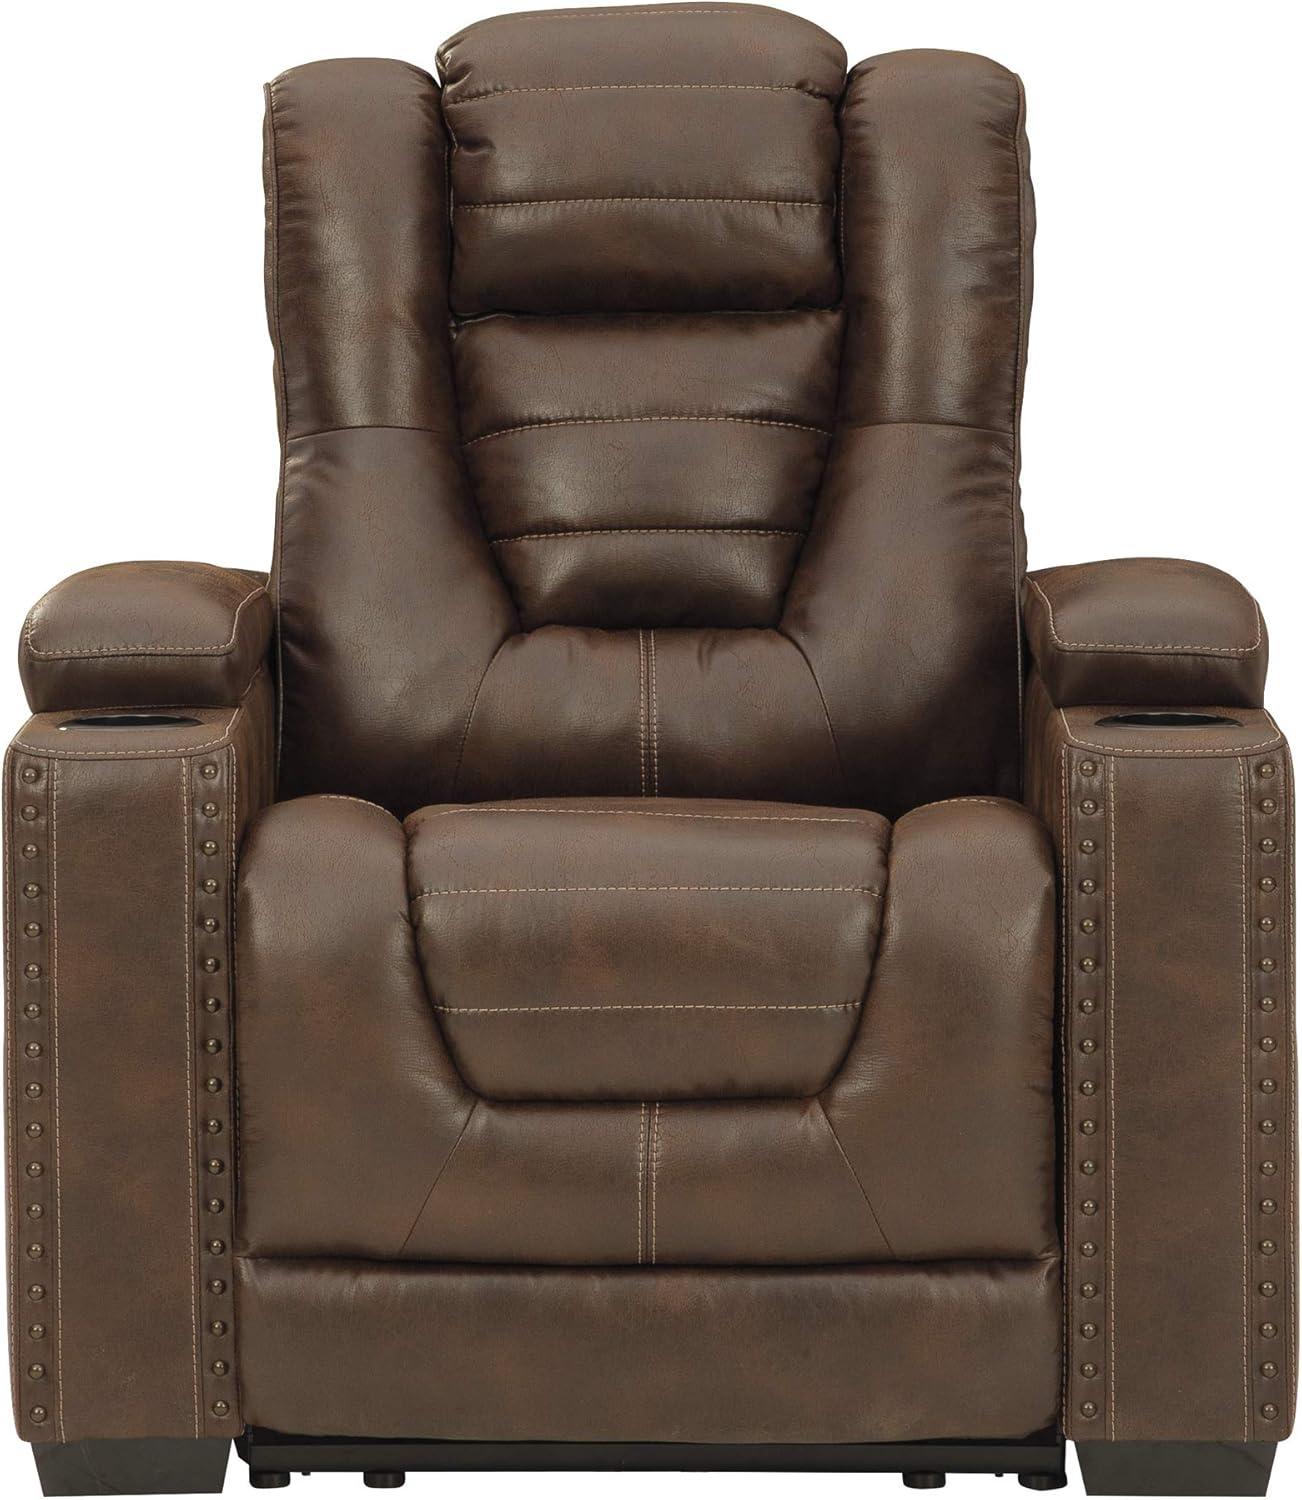 Transitional 38" Brown Faux Leather Power Recliner with Headrest